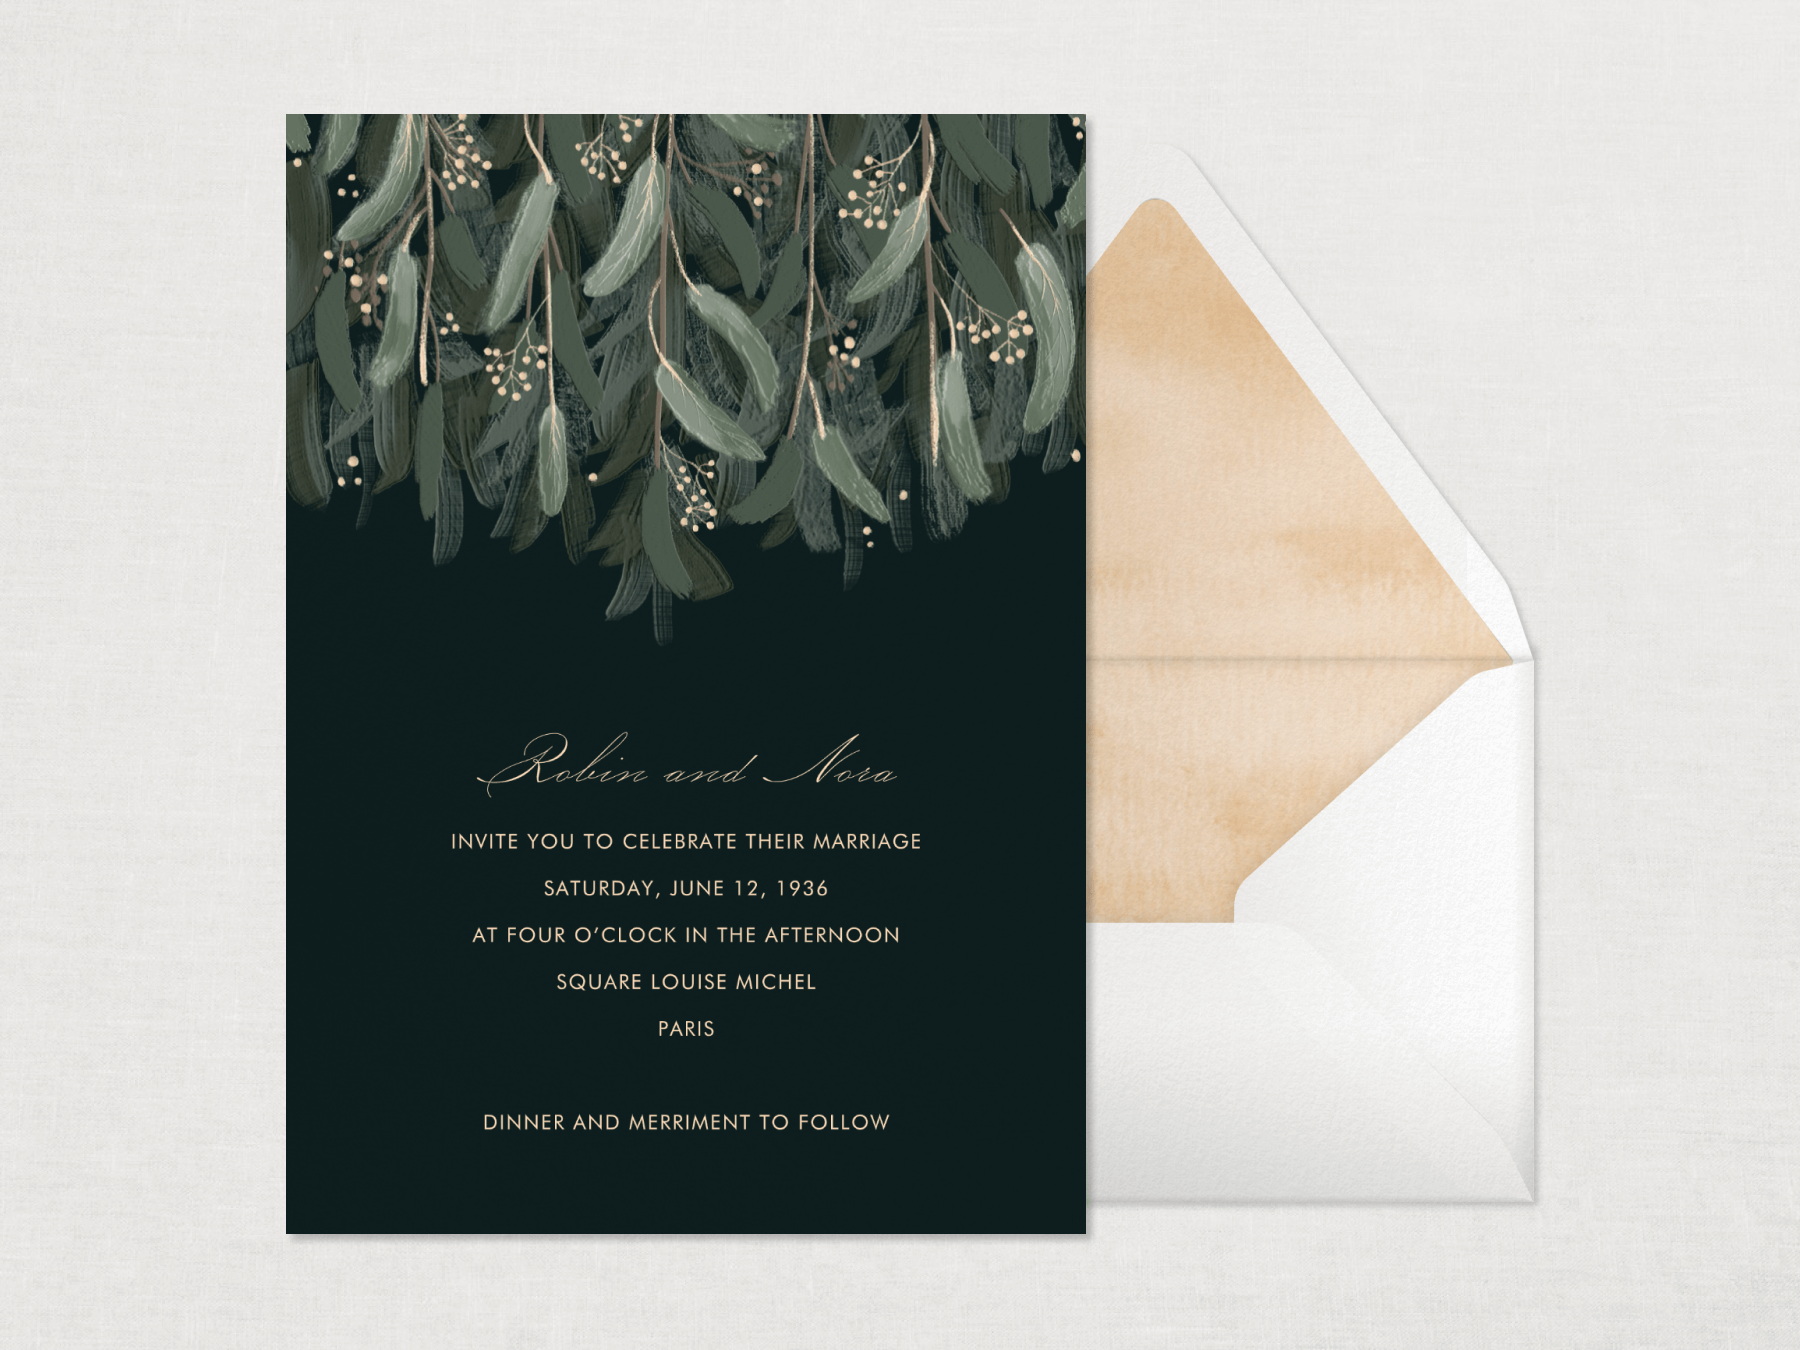 A black wedding invitation with silvery green leafy branches falling from the top.